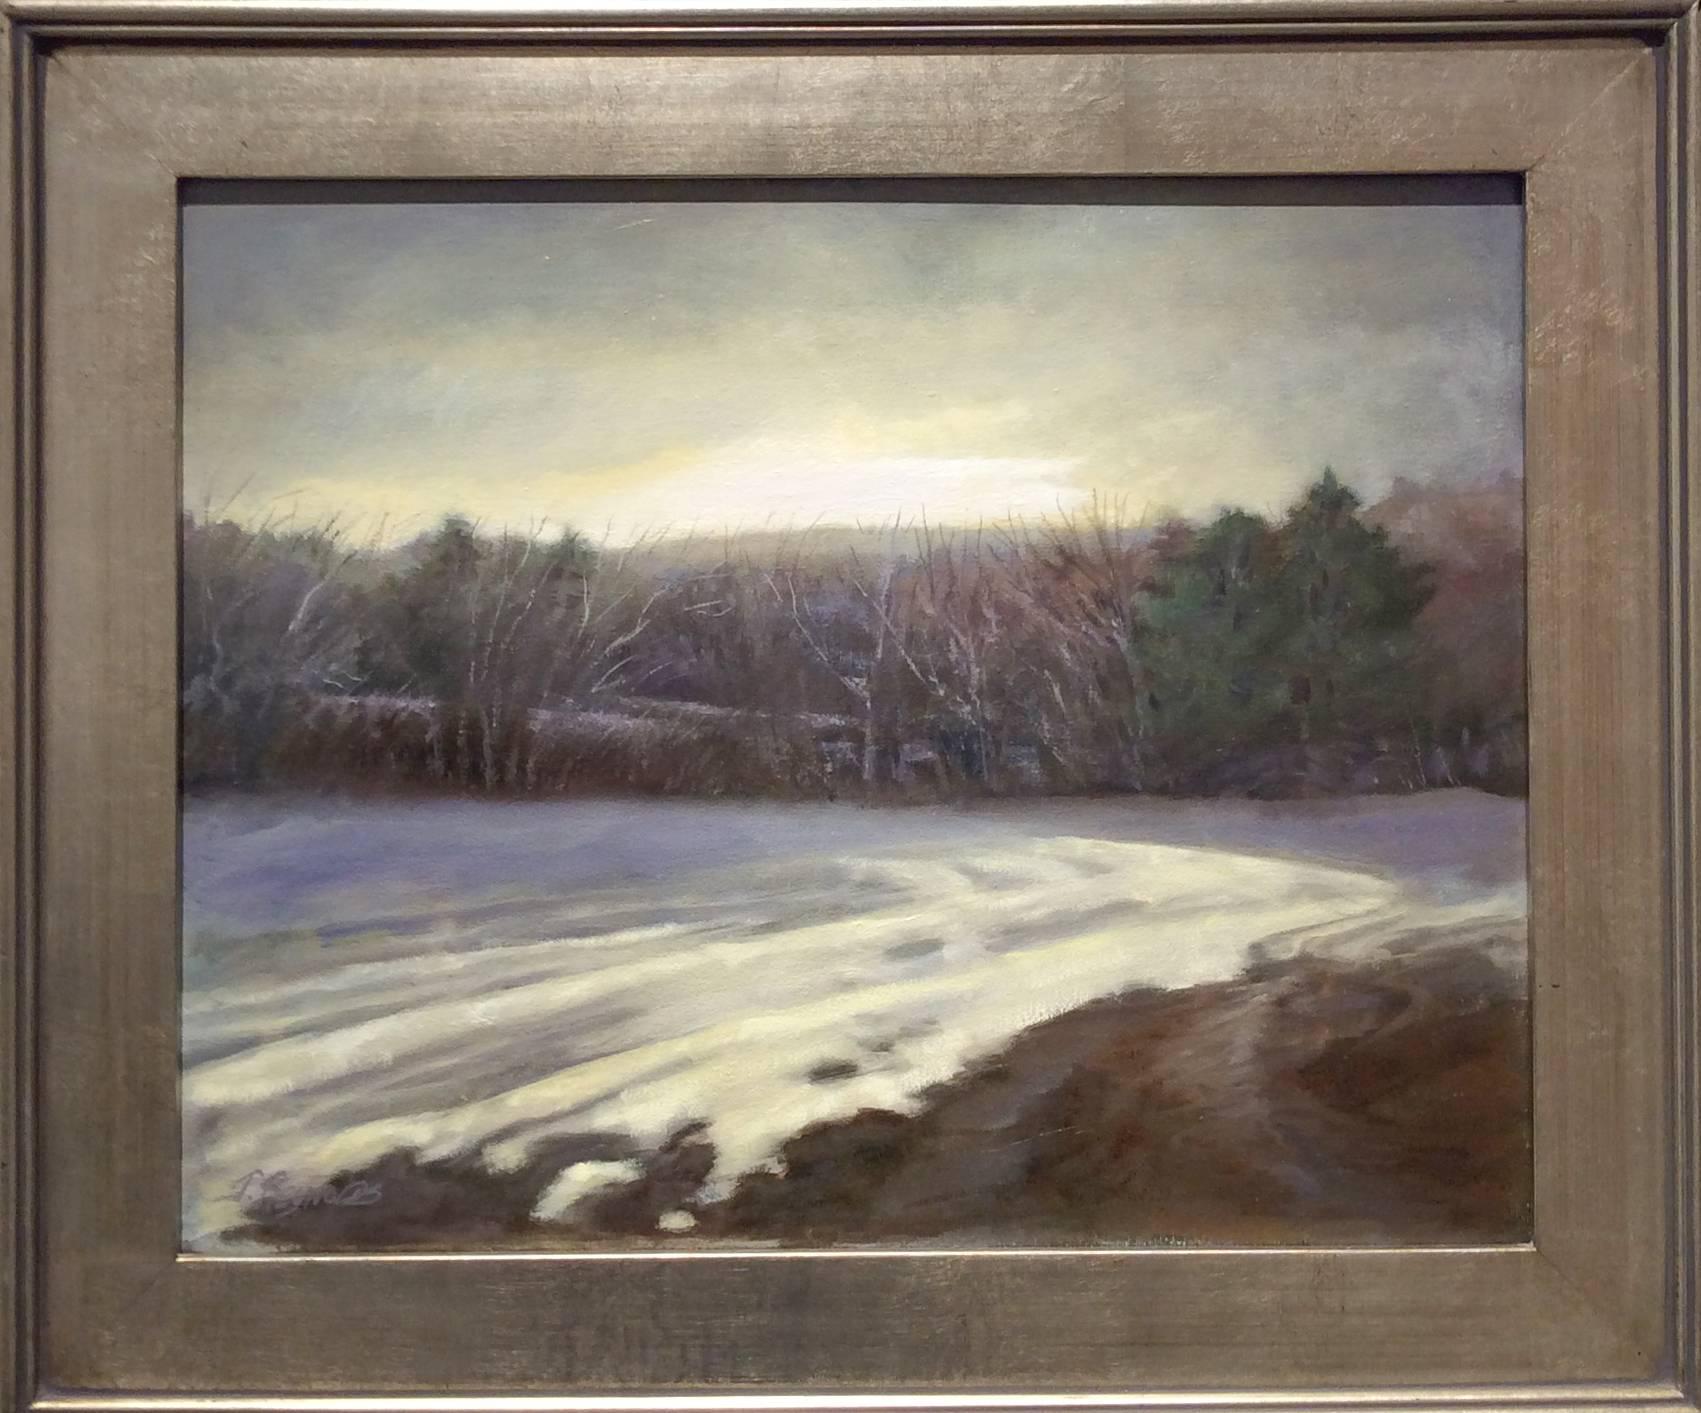 Winter Corn Field (Landscape Oil Painting of Snowy Country Field, Silver Frame)